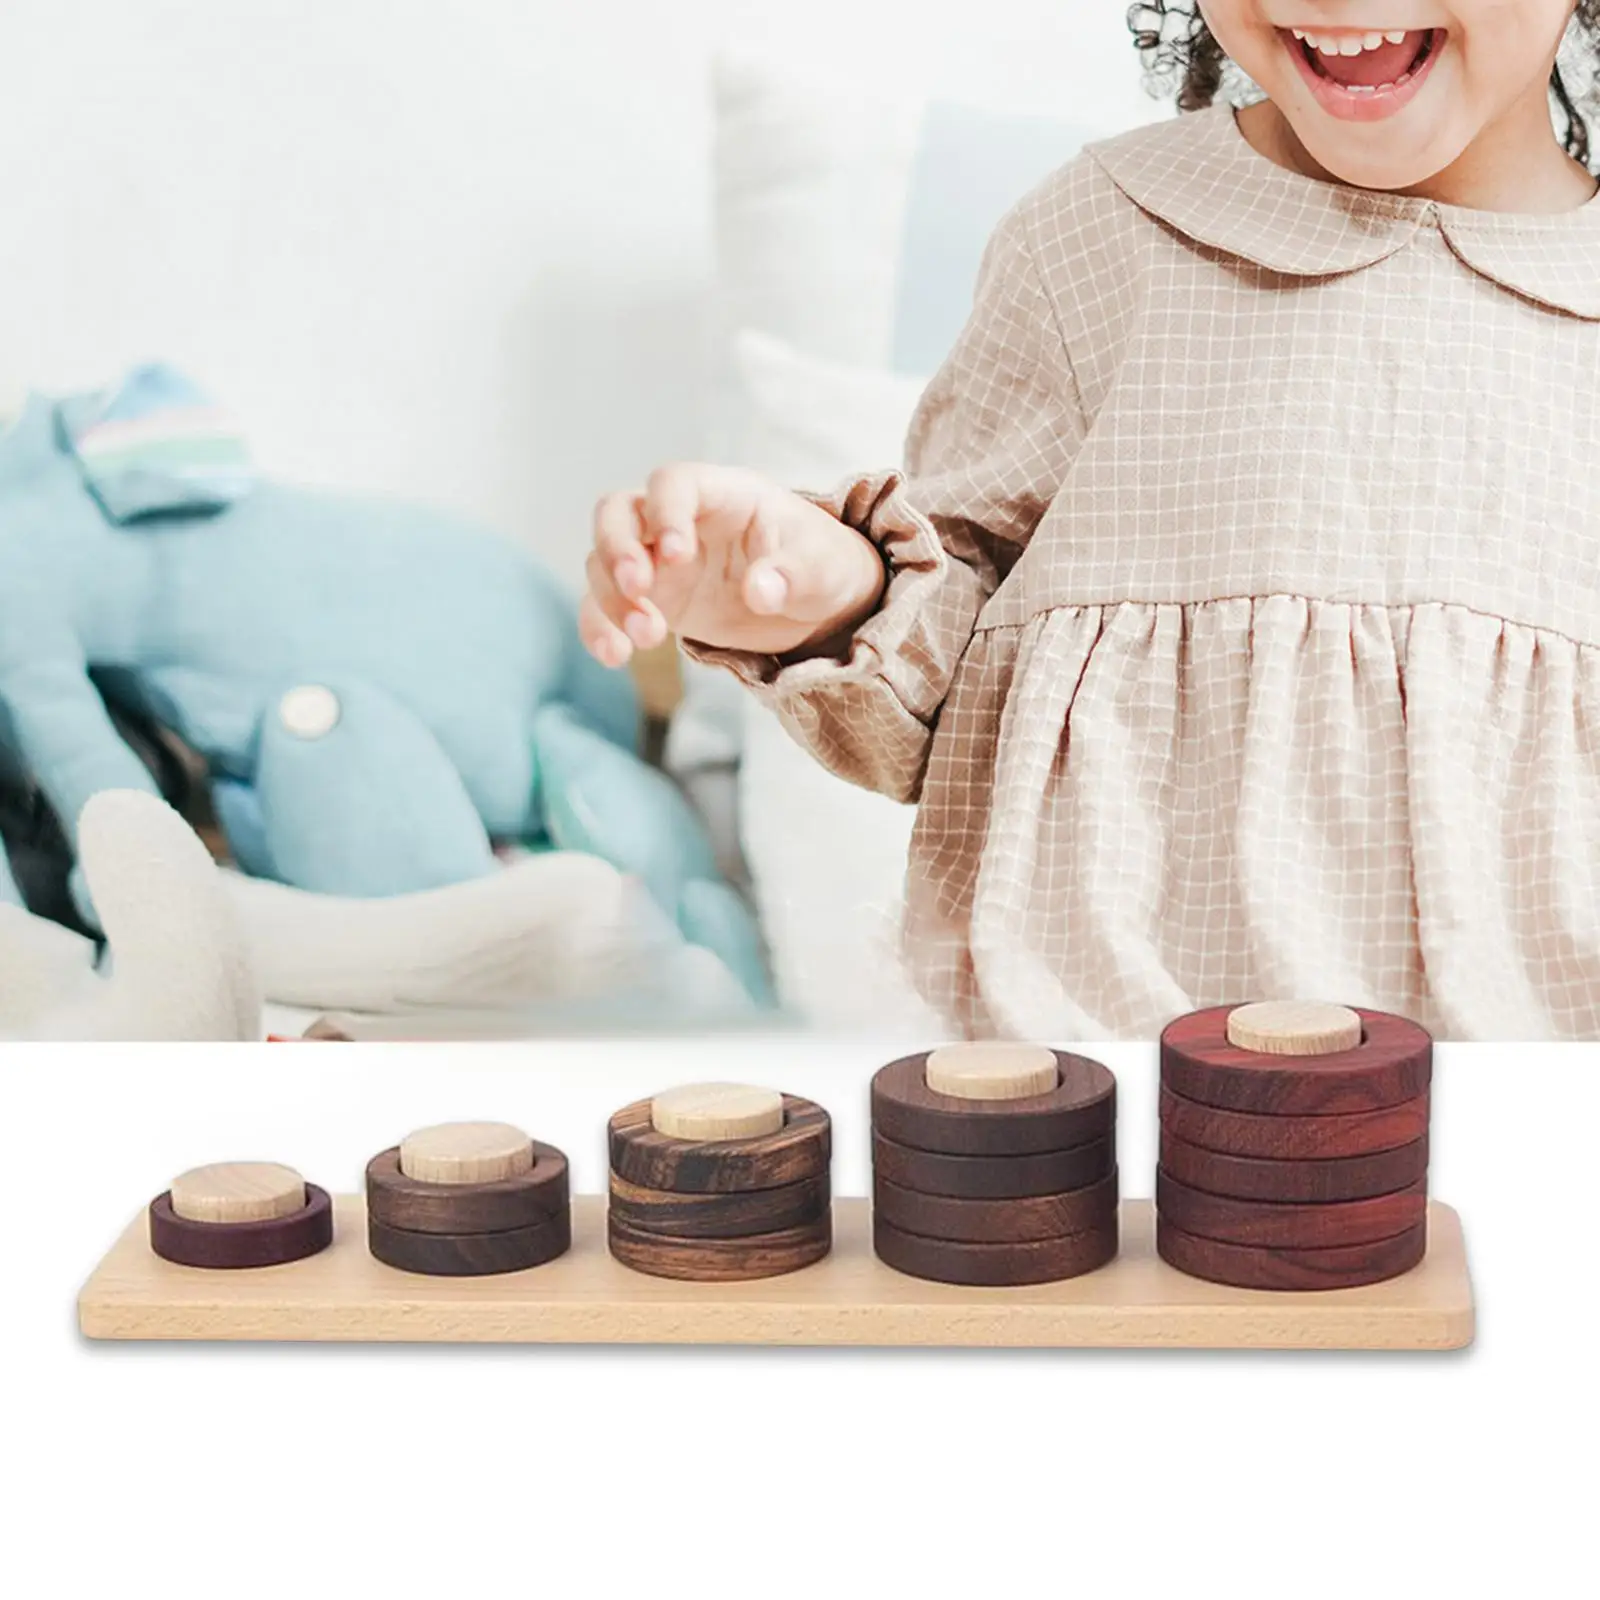 Wooden Stacking Toys Developmental Toy Early Educational Learning Toy Intelligence Toy for Children Girls Boy Birthday Gifts